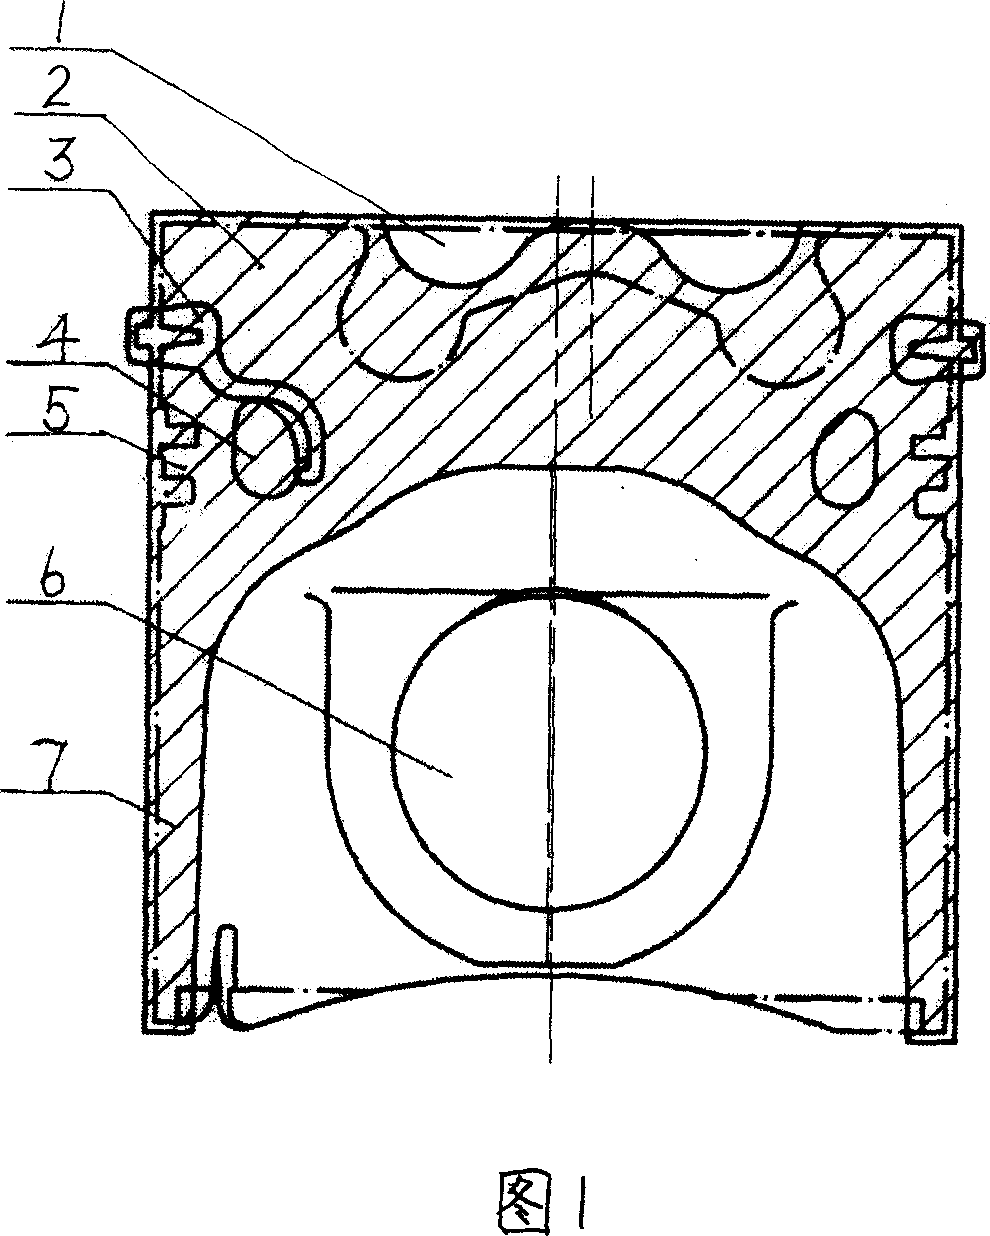 Method for casting piston blank with inner cooling path by liquid state extruding casting process